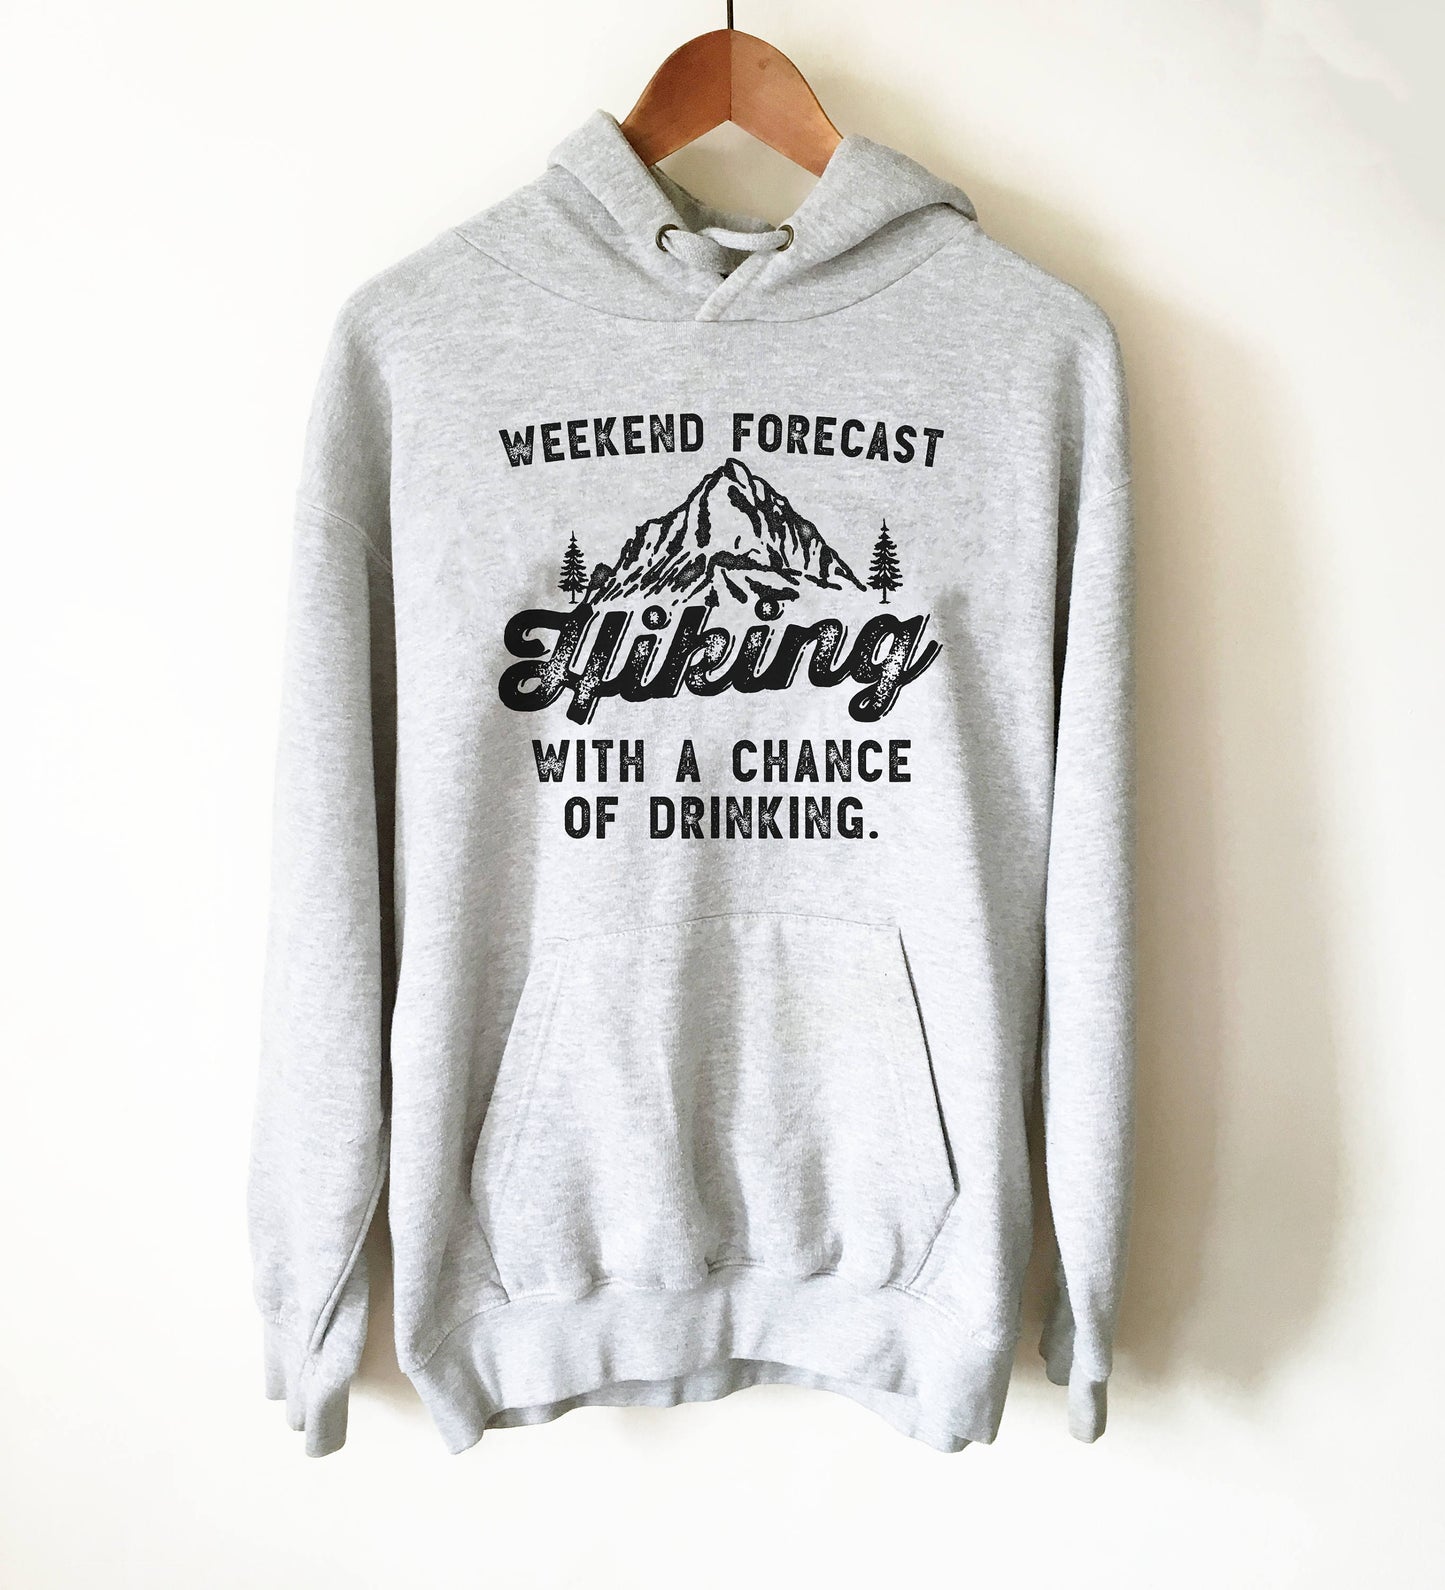 Hiking With A Chance Of Drinking Hooded Sweatshirt - hiking hoodie, hiking shirt, camping hoodie, hiking gift, hiking sweatshirt